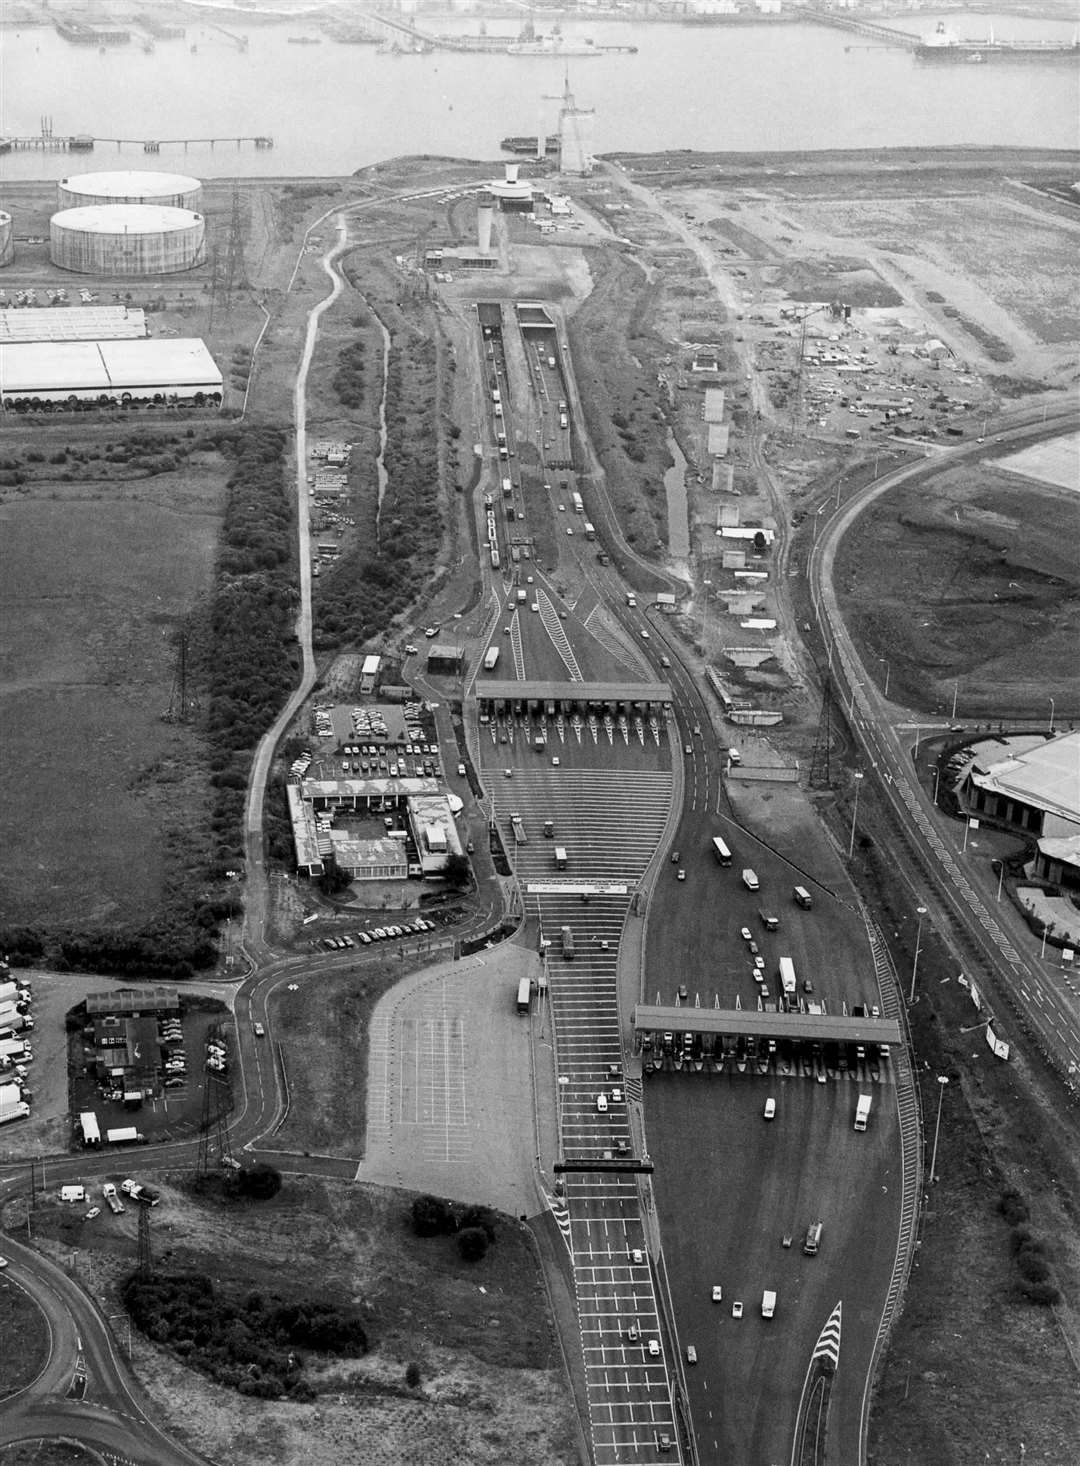 An ever-busy Dartford Tunnel photographed in 1989